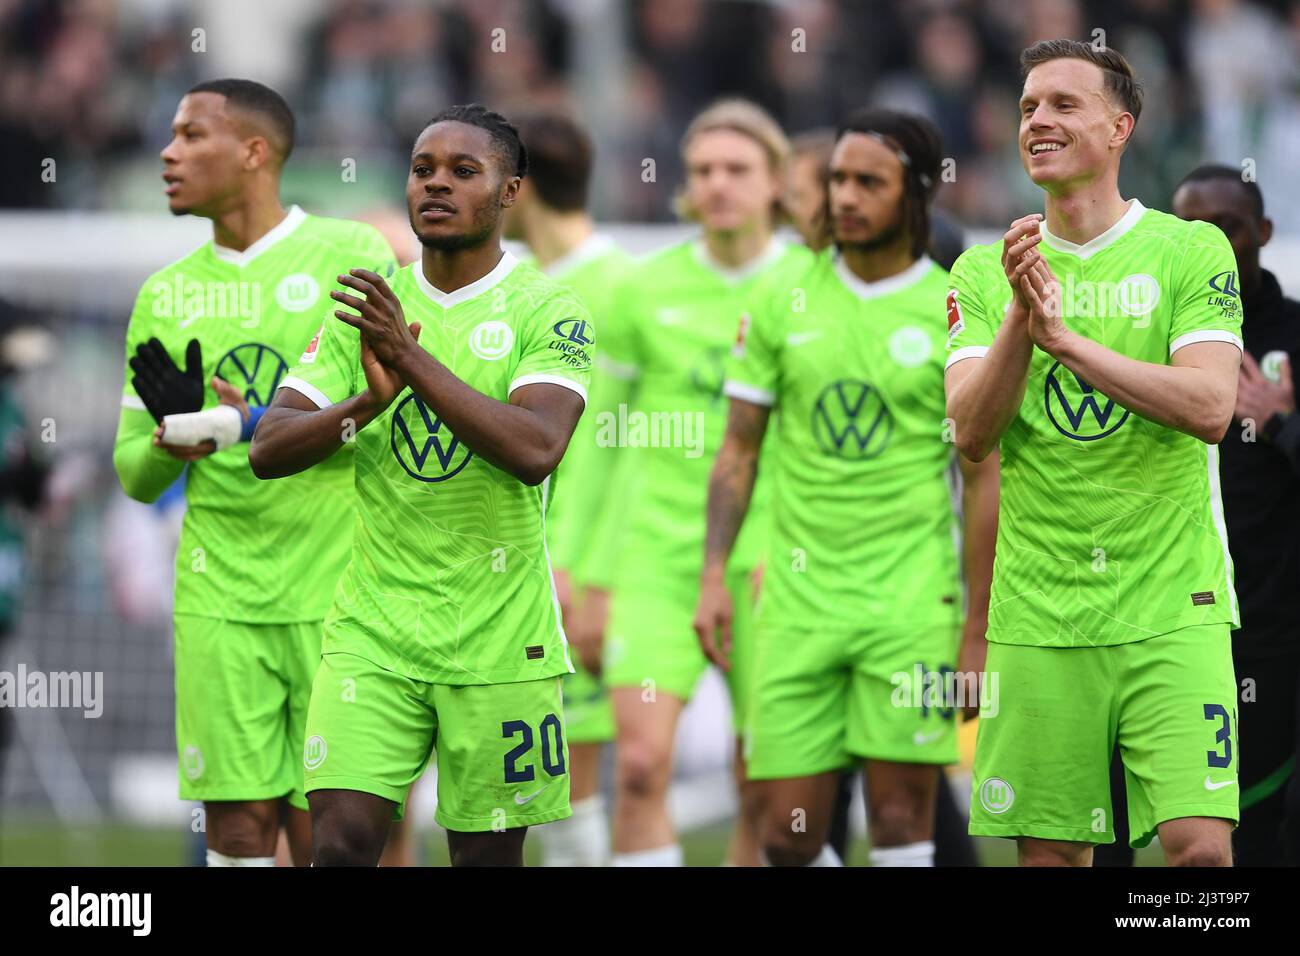 Wolfsburg, Germany. 09th Apr, 2022. Soccer: Bundesliga, VfL Wolfsburg - Arminia Bielefeld, Matchday 29, Volkswagen Arena. Wolfsburg's Aster Vranckx (l-r), Ridle Baku, Sebastiaan Bornauw, Kevin Mbabu and Yannick Gerhardt clap after the game. Credit: Swen Pförtner/dpa - IMPORTANT NOTE: In accordance with the requirements of the DFL Deutsche Fußball Liga and the DFB Deutscher Fußball-Bund, it is prohibited to use or have used photographs taken in the stadium and/or of the match in the form of sequence pictures and/or video-like photo series./dpa/Alamy Live News Stock Photo